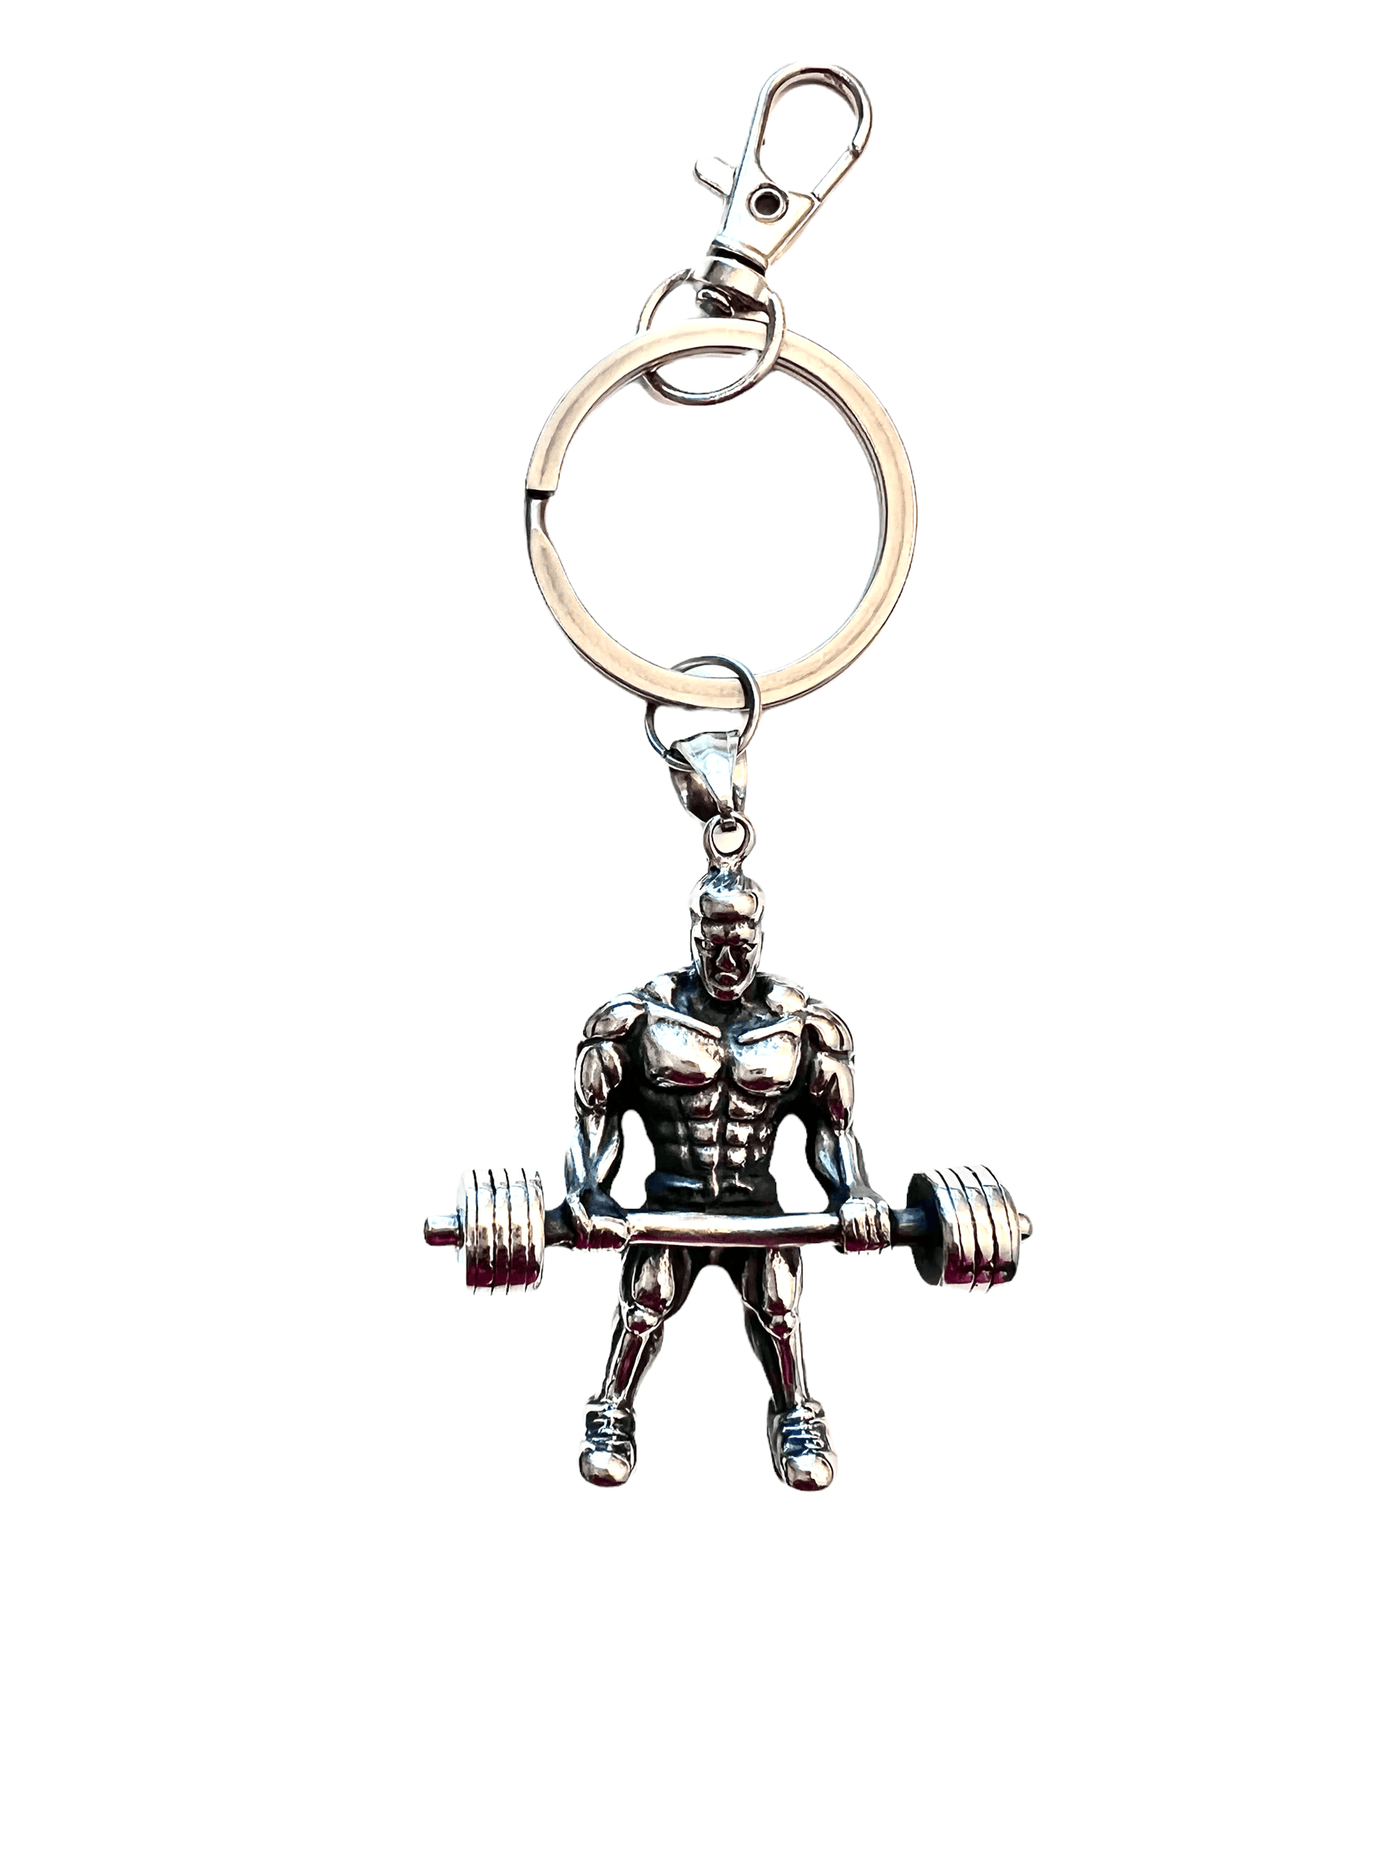 Stainless Steel Weight lifter Key Chain - Brent's Bling